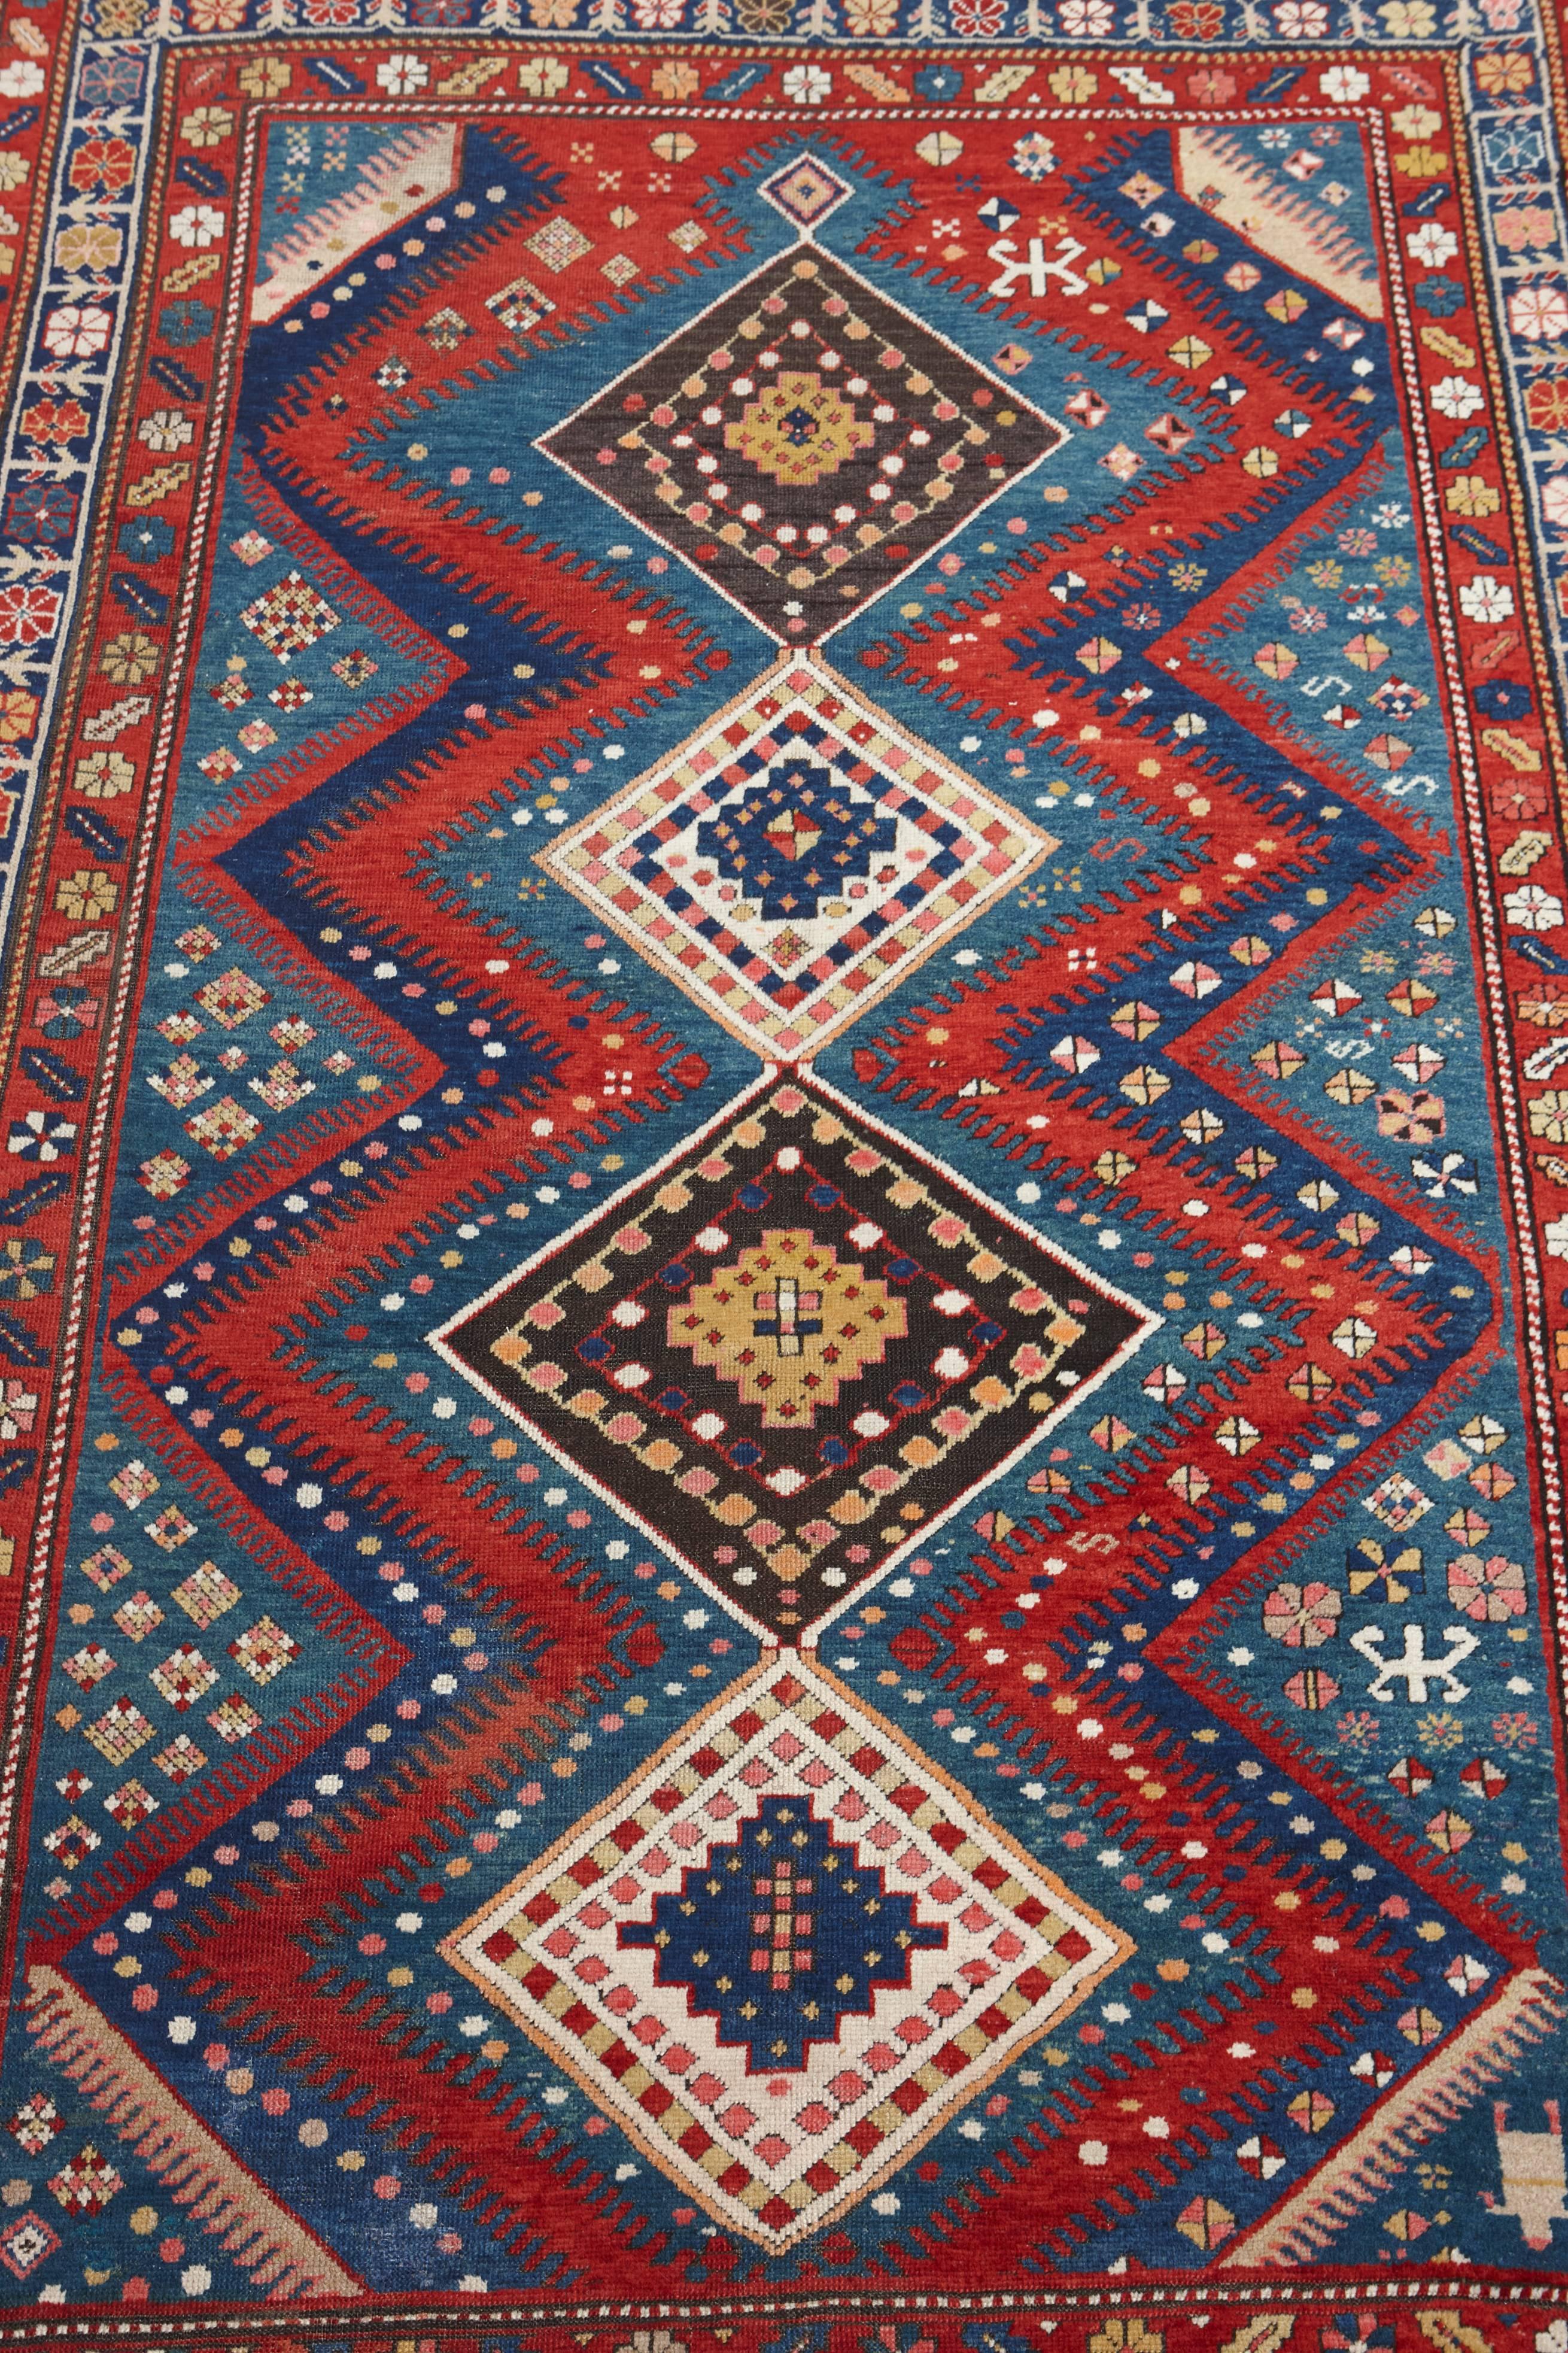 Woven in the regions around North Armenia and South Georgia, Bordjalou Kazaks use some of the most particular designs among Caucasian rugs. Easily recognizable by their latch-hook designs in diagonal formats, Bordjalou Kazaks combine many rich